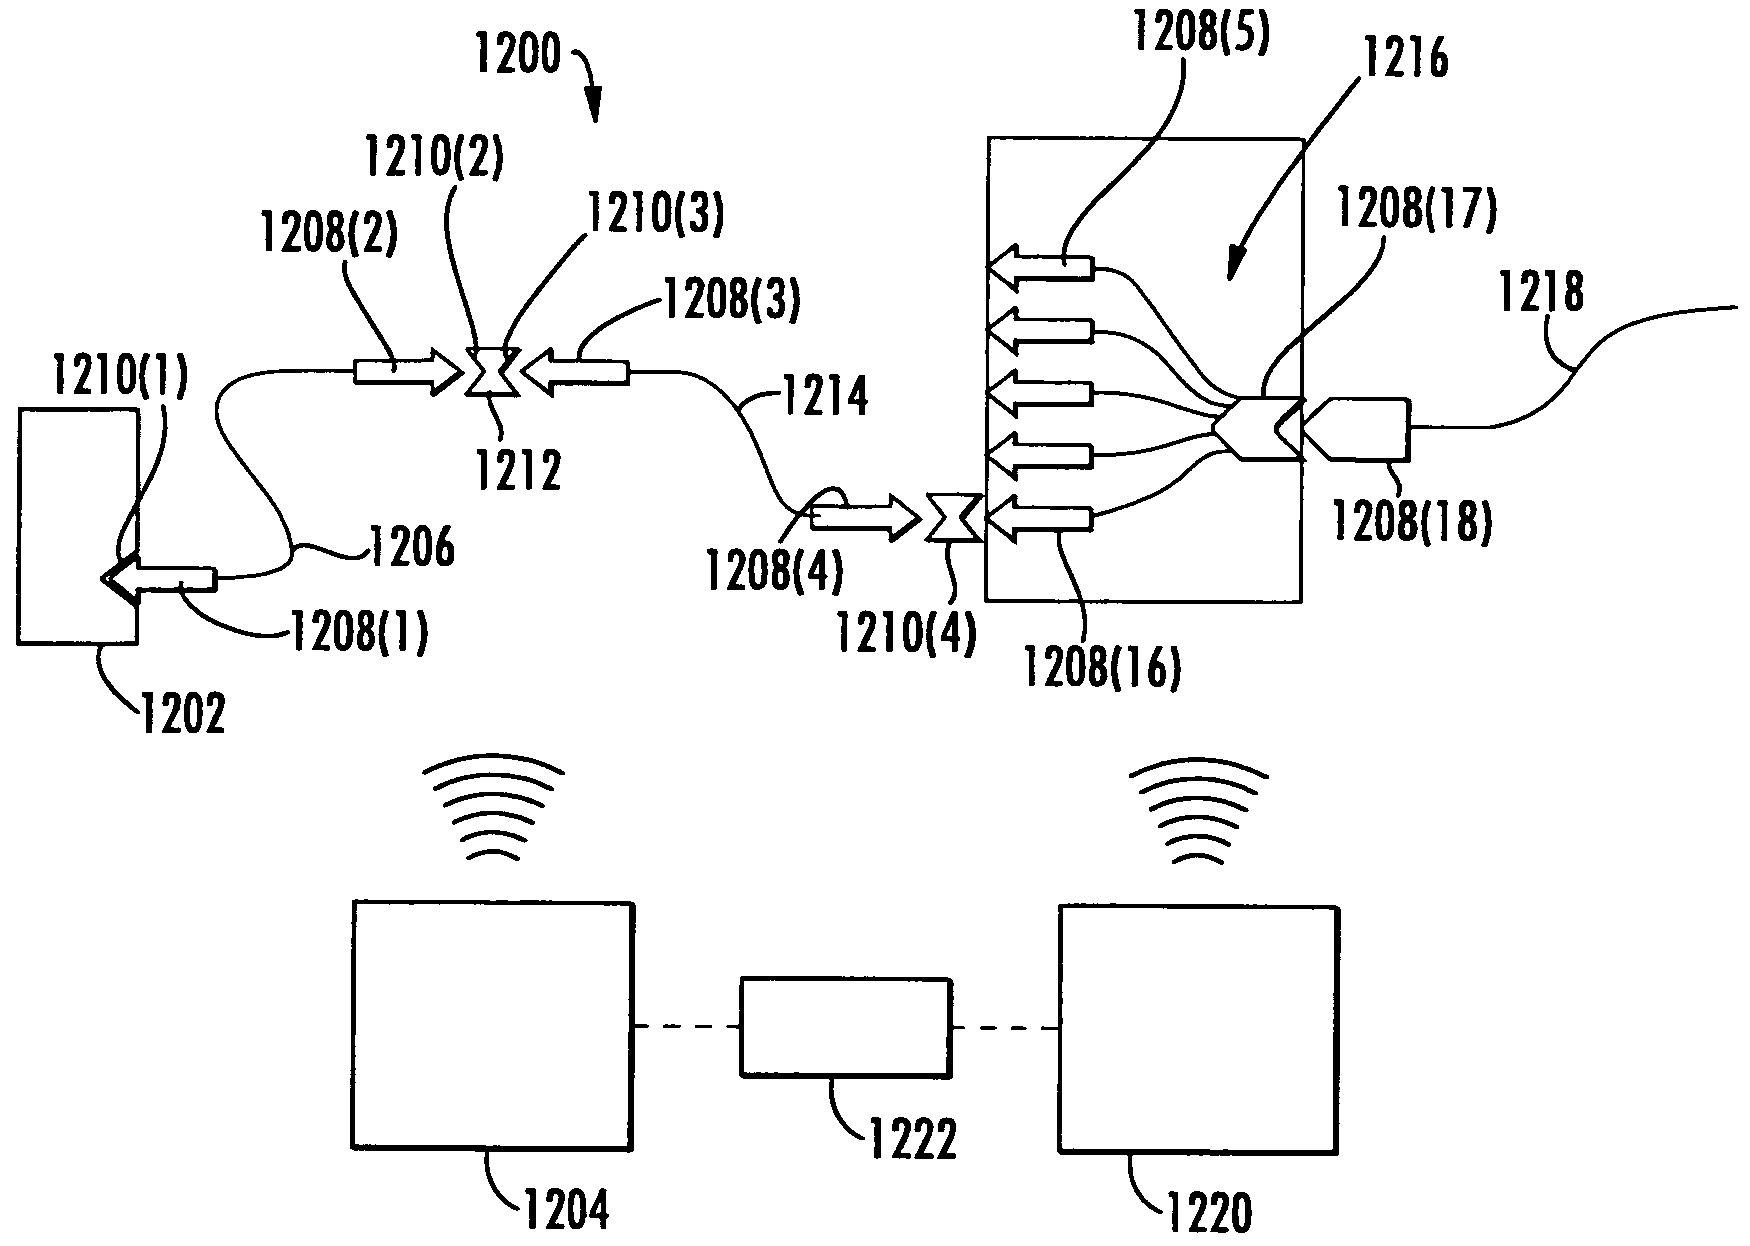 System for mapping connections using RFID function